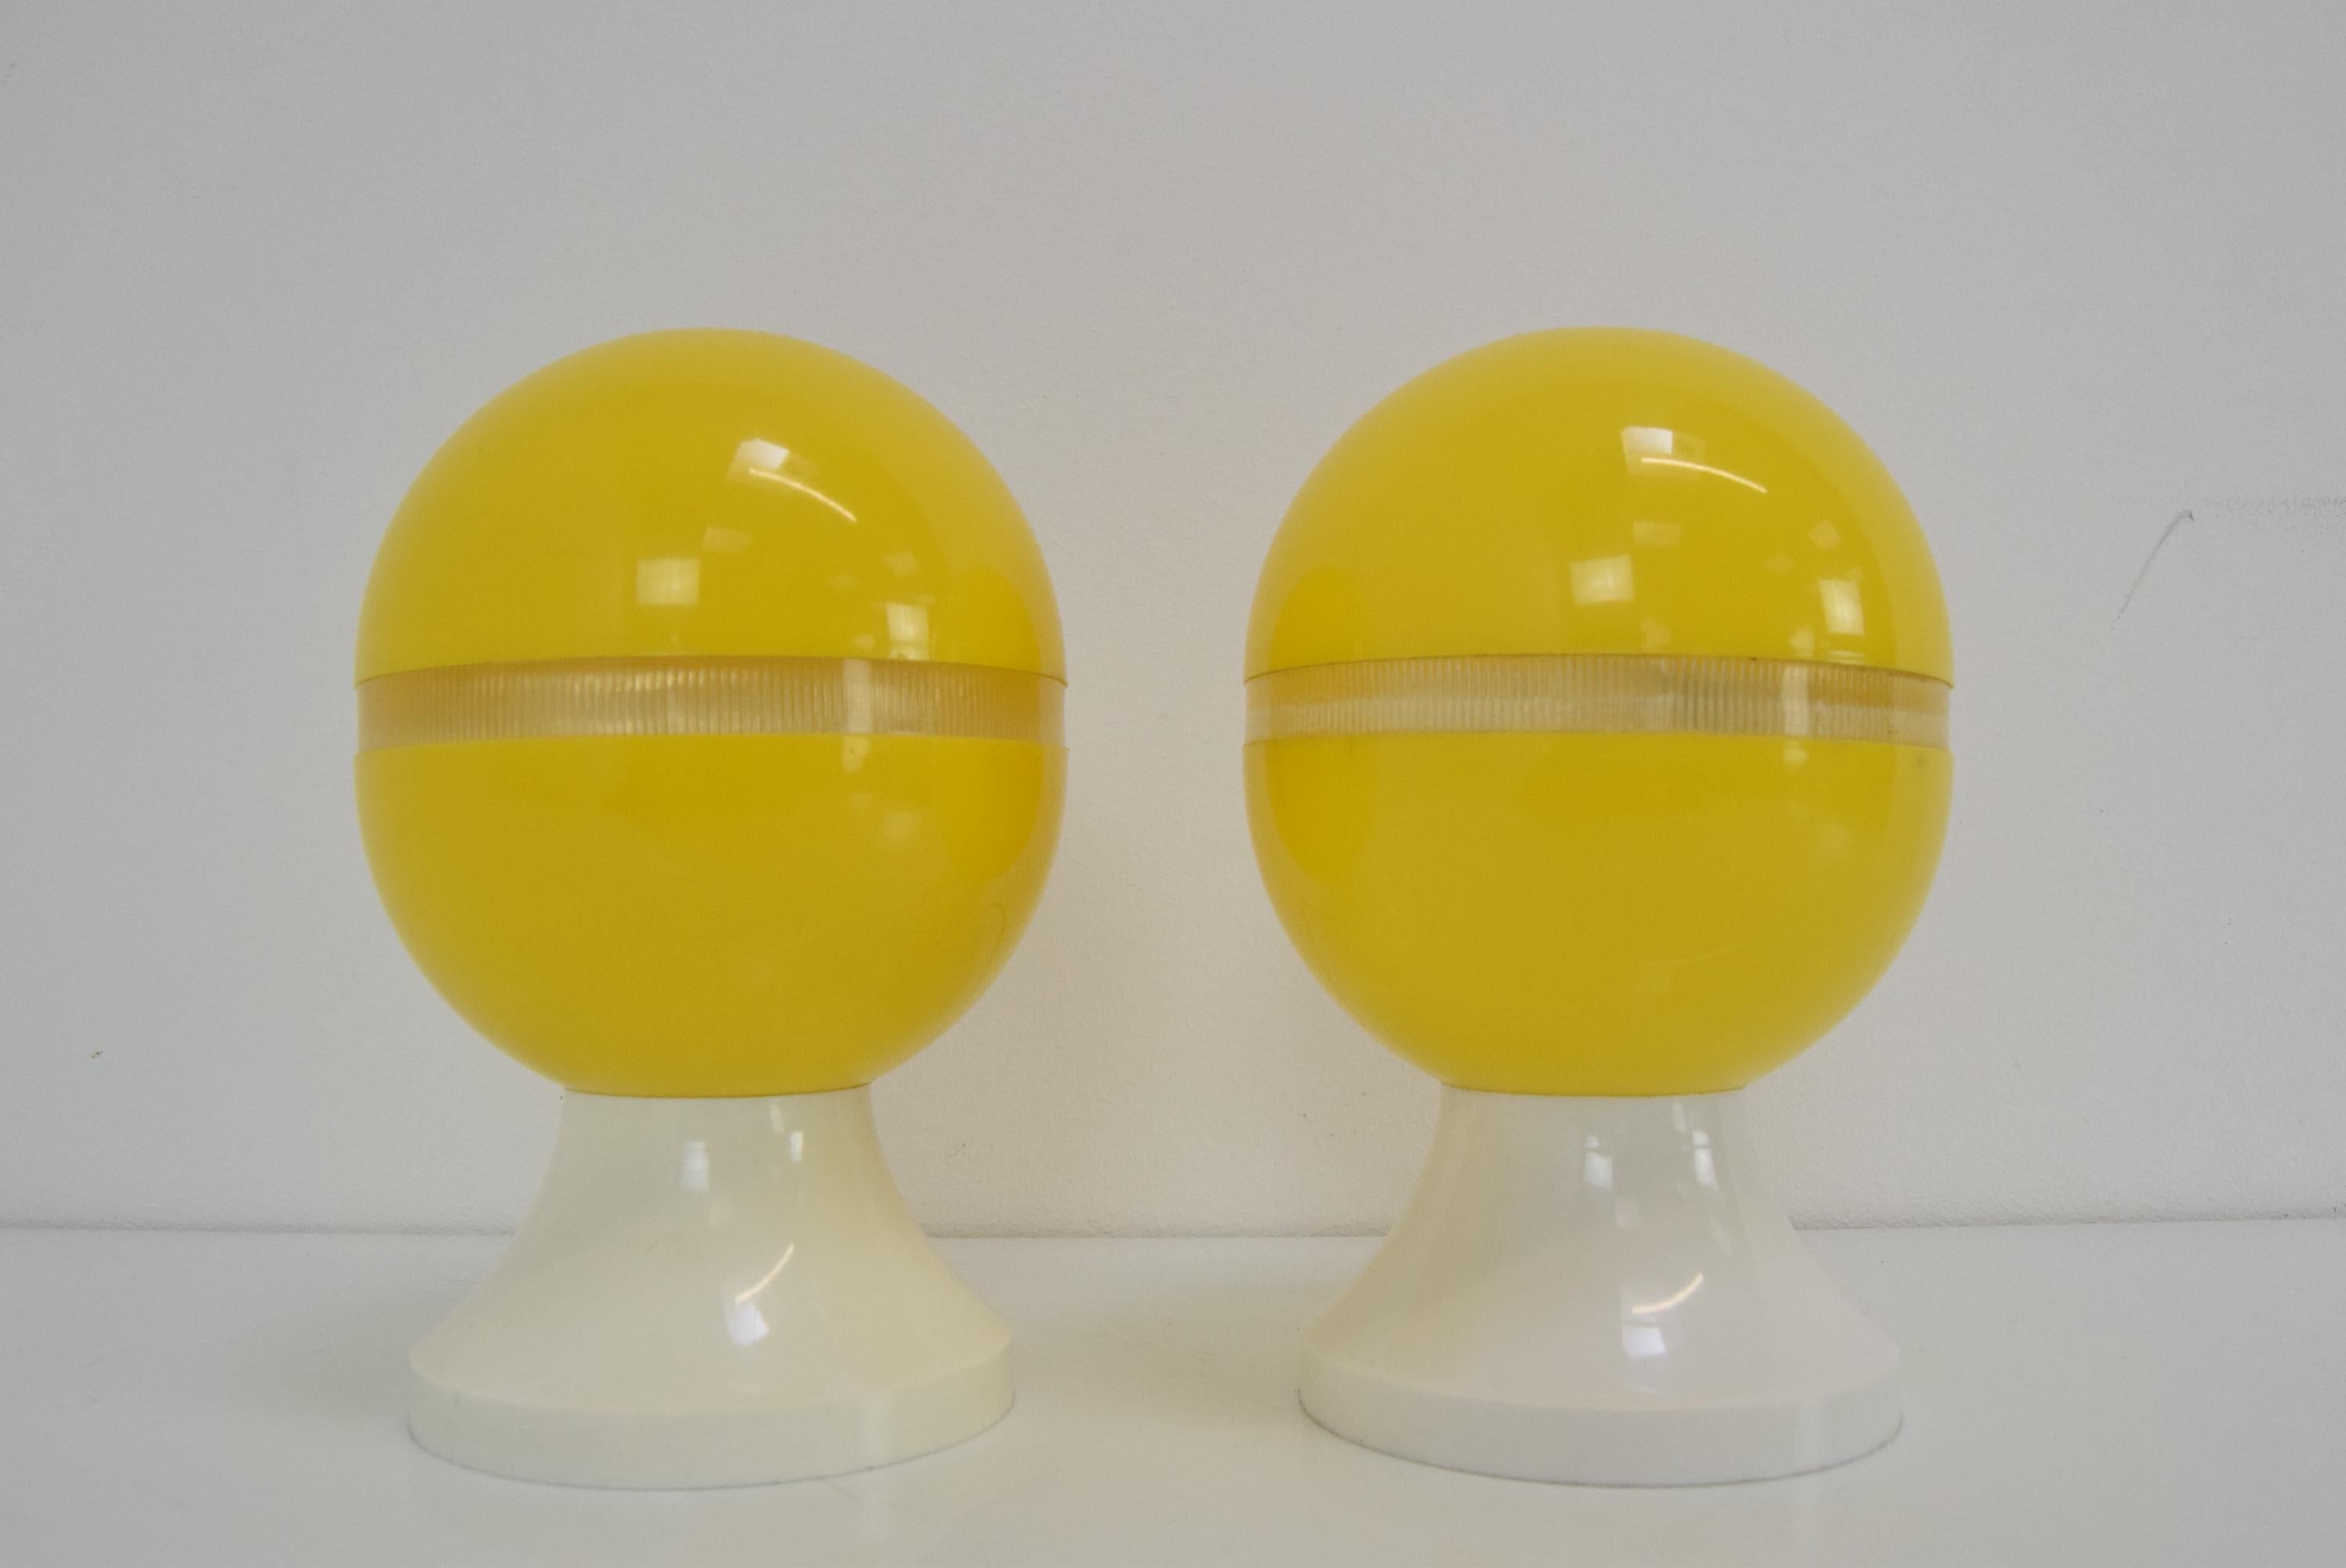 Czech Pair of Mid-Century Plastic Table Lamps, 1970's